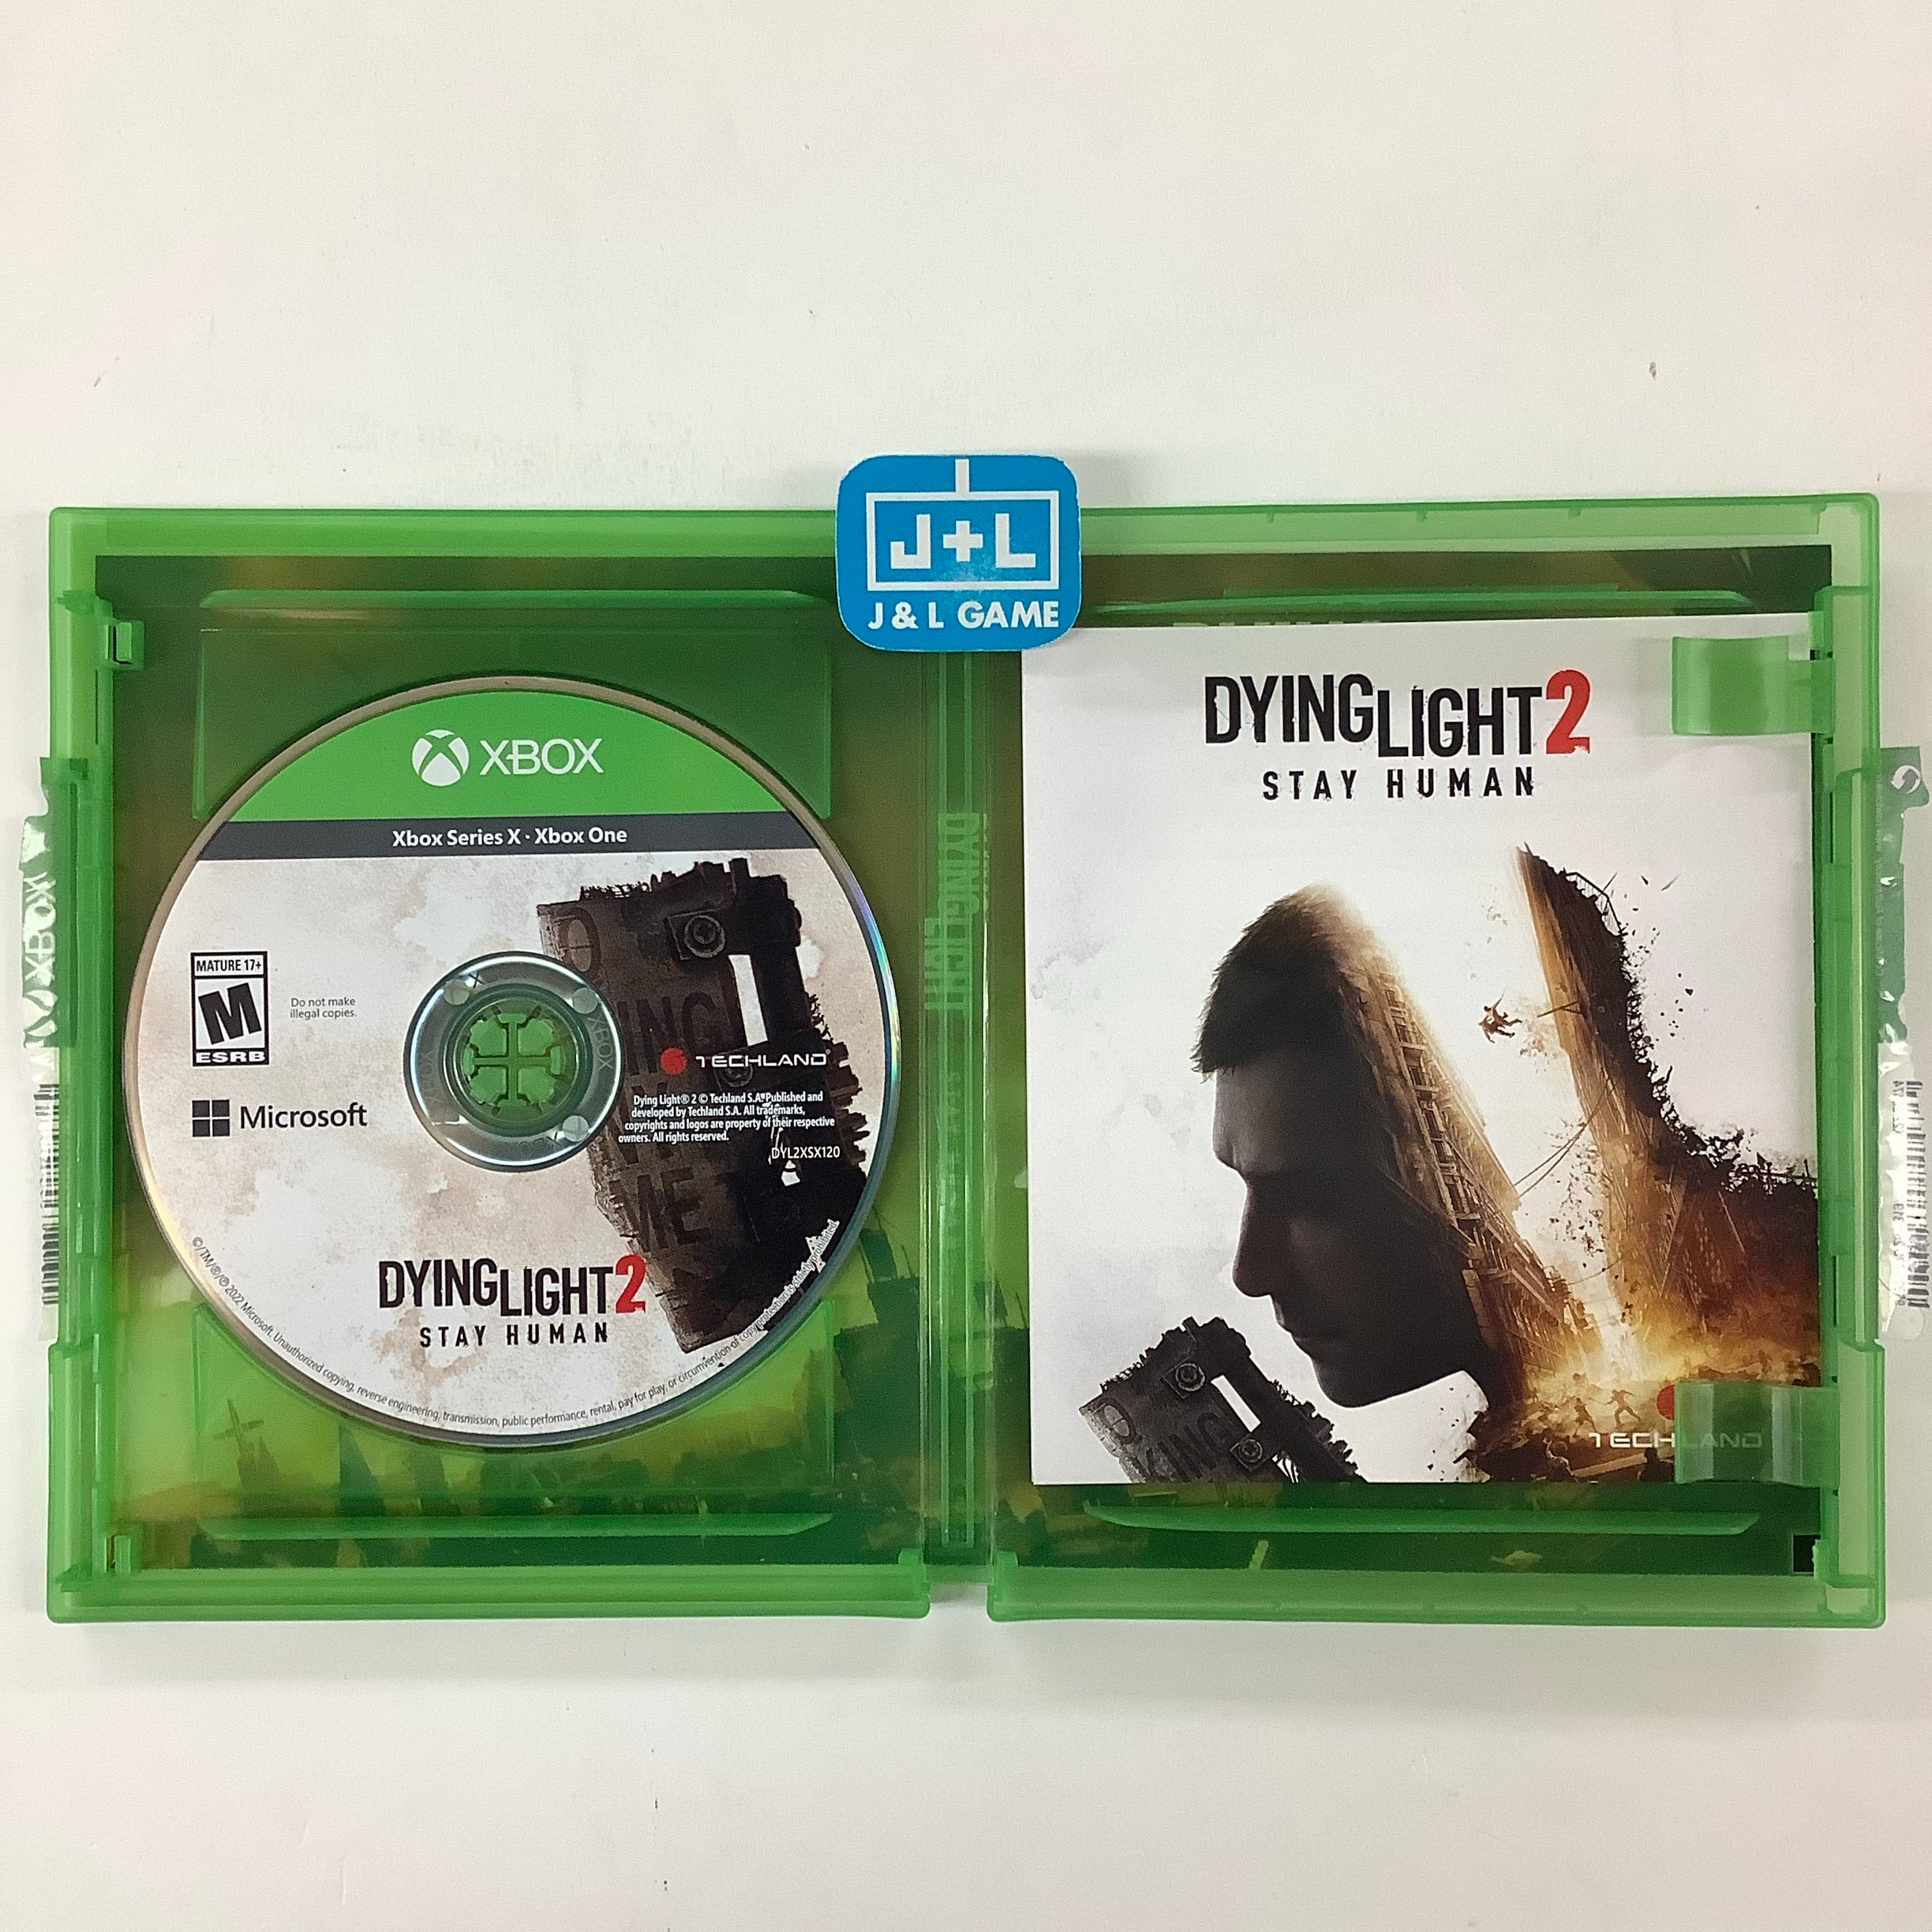 Dying Light 2 Stay Human - (XSX) Xbox Series X [UNBOXING] Video Games Square Enix   